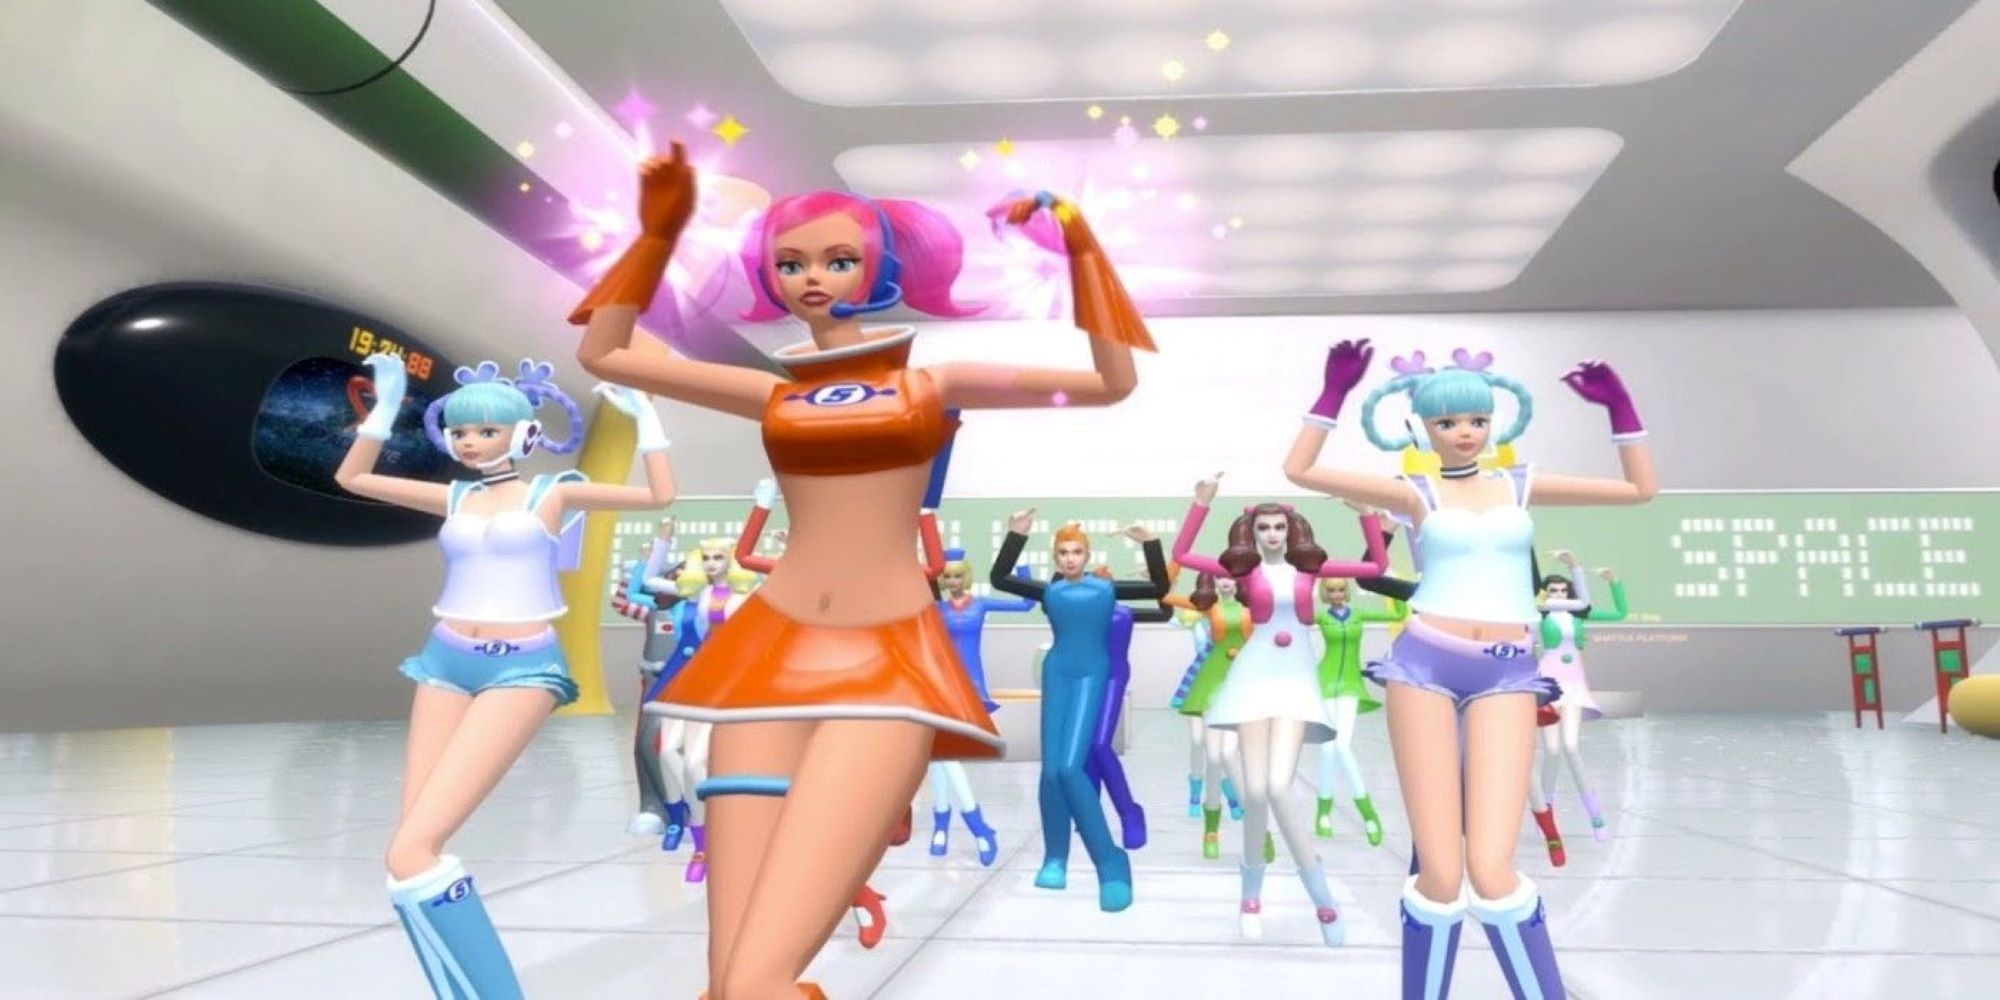 Ulala and two blue-haired sidekicks lead citizens in a parade of rocking report shows in Space Channel 5 VR.